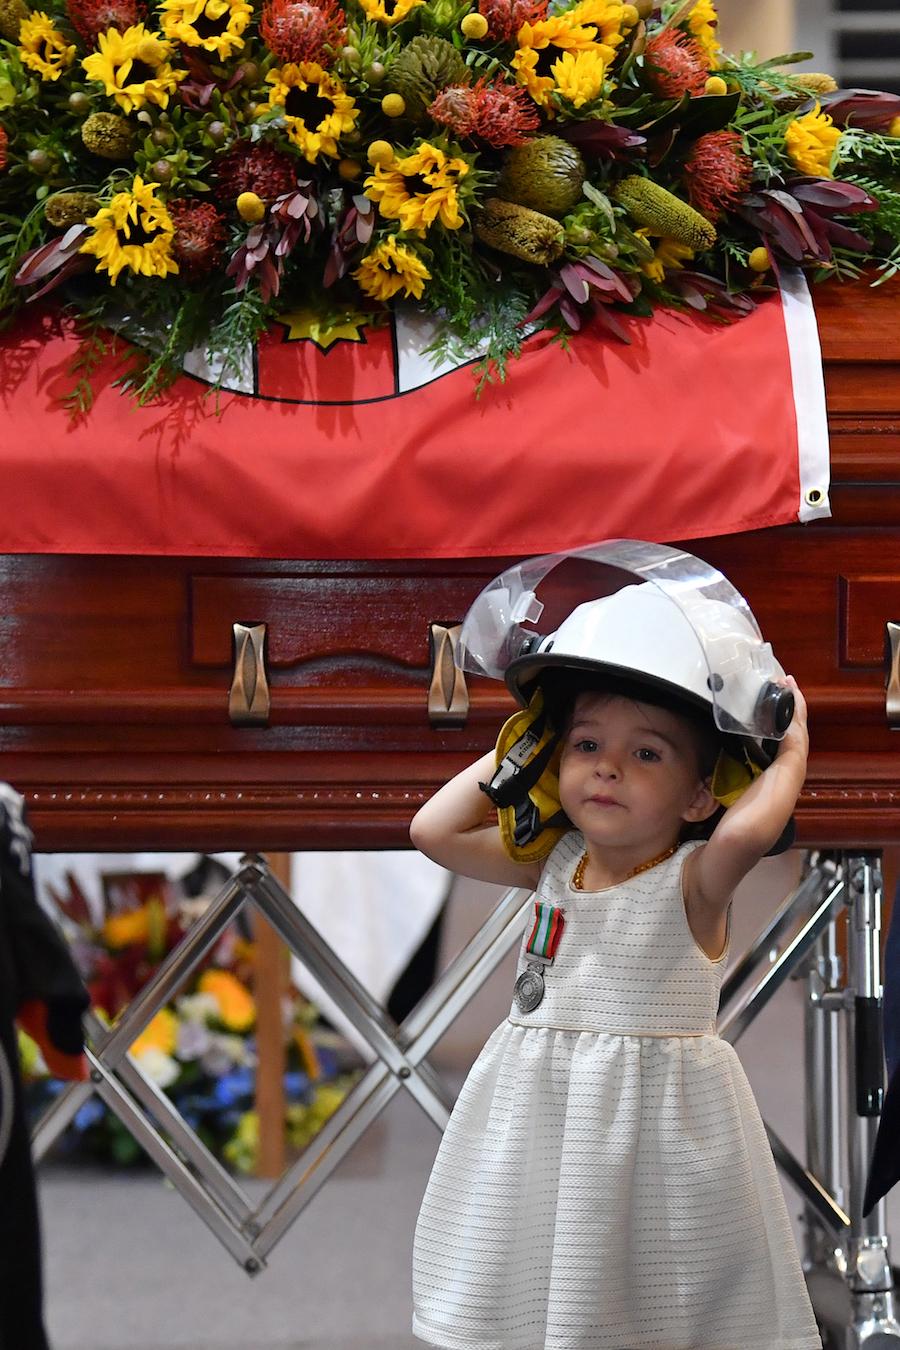 Charlotte O'Dwyer, pinned with a medal for bravery and her father's helmet, stands next to Geoffrey O'Dwyer's coffin at his funeral service in Sydney, Australia. (©Getty Images | <a href="https://www.gettyimages.com/detail/news-photo/charlotte-odwyer-the-young-daughter-of-rural-fire-service-news-photo/1192337551?adppopup=true">Dean Lewins-Pool</a>)